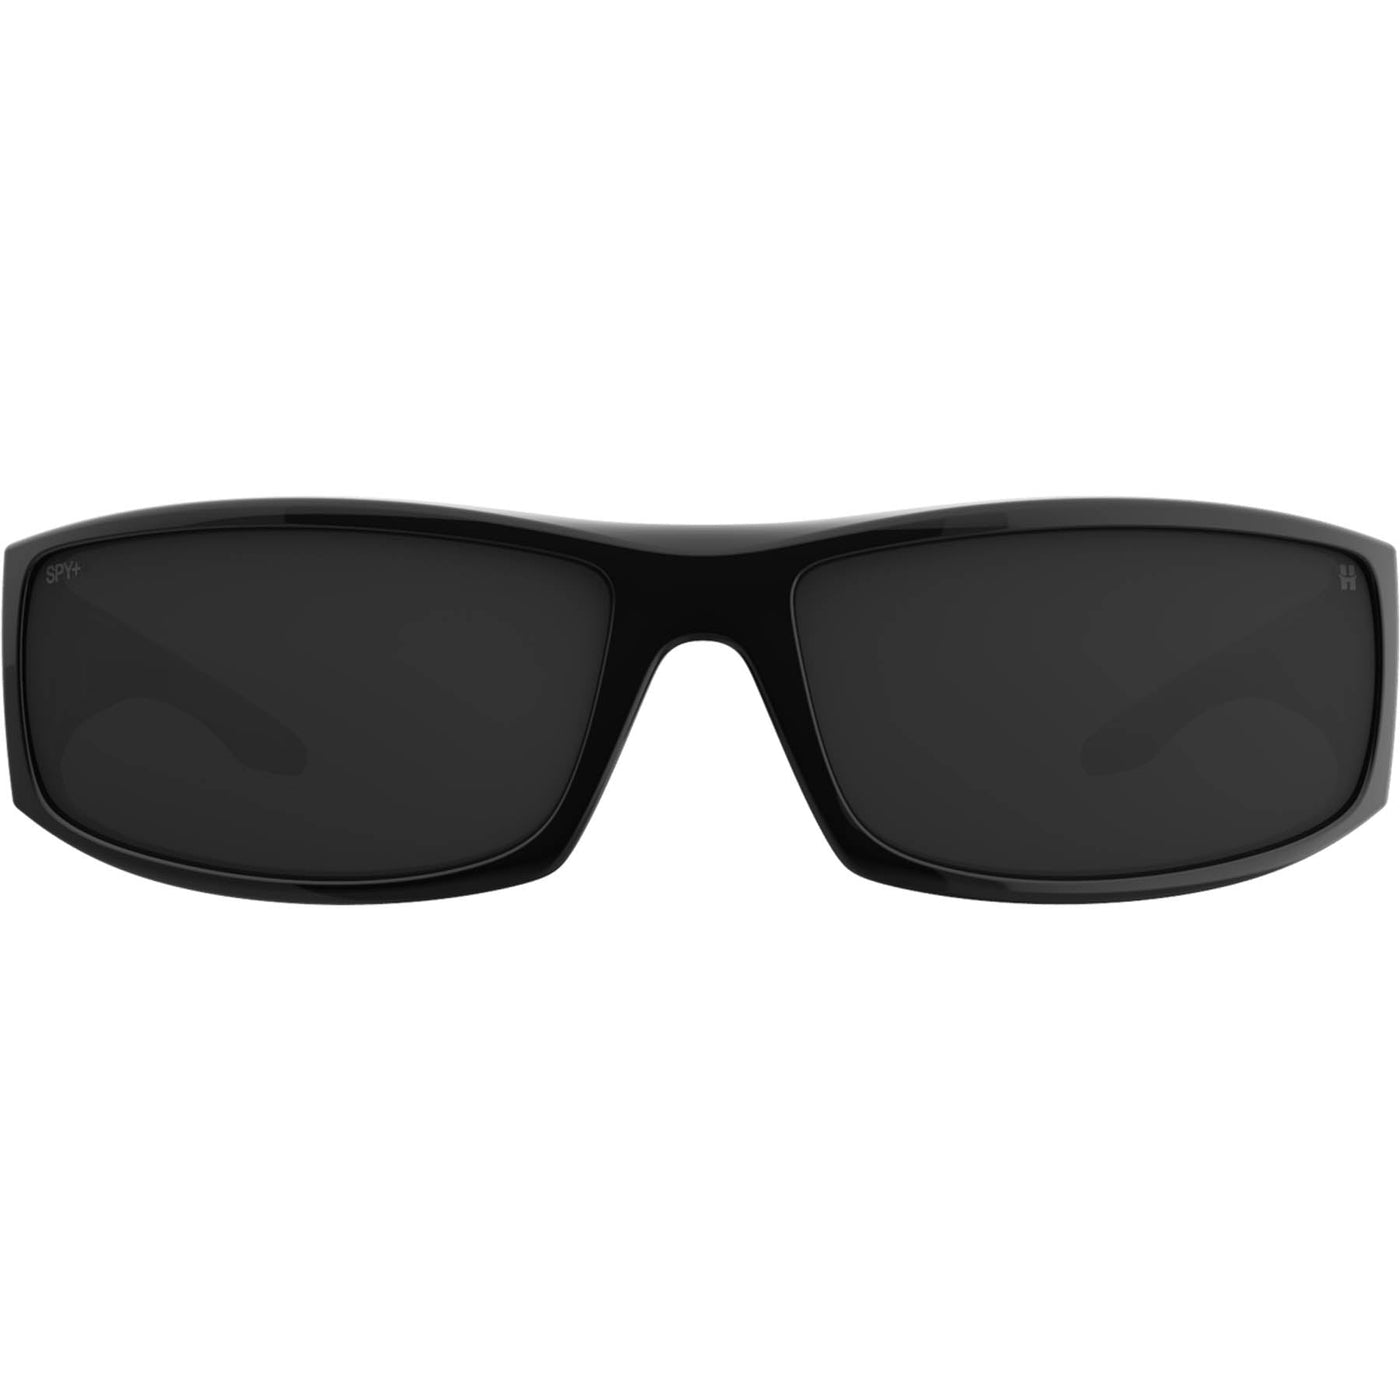 SPY COOPER Polarized Sunglasses, Happy Lens - Gray 8Lines Shop - Fast Shipping